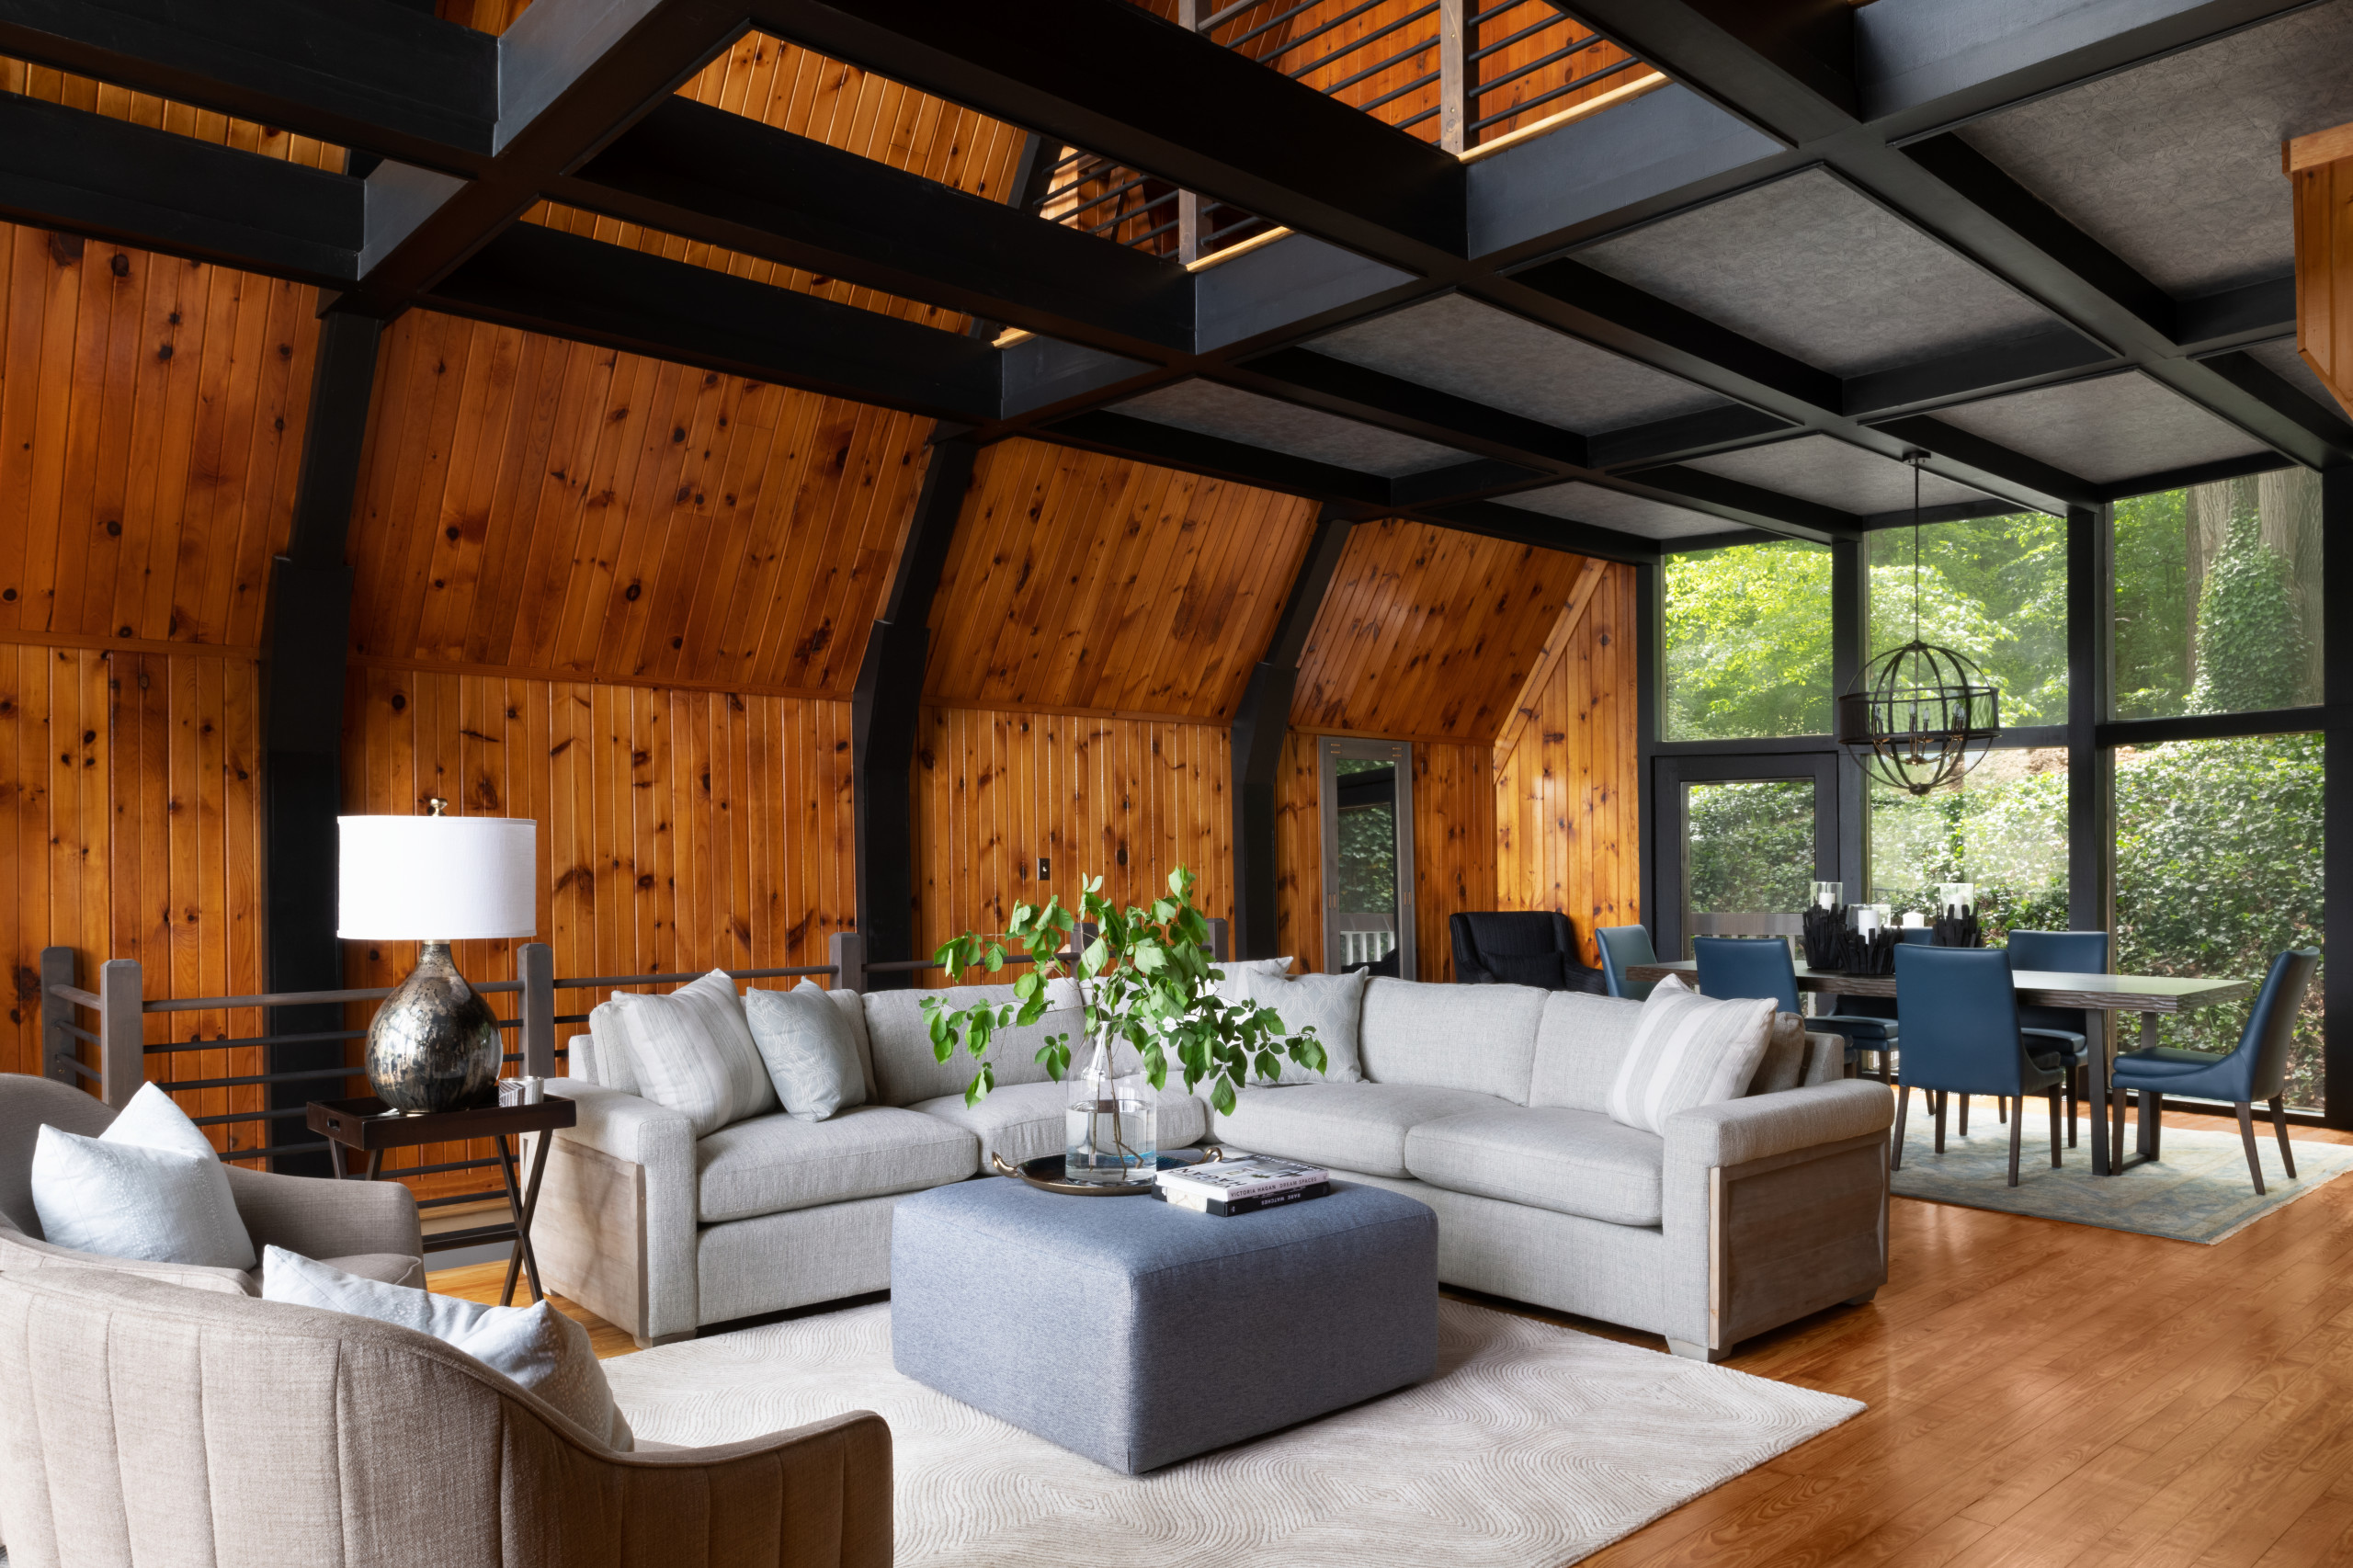 Mid-century modern Living room with vaulted and beamed ceiling